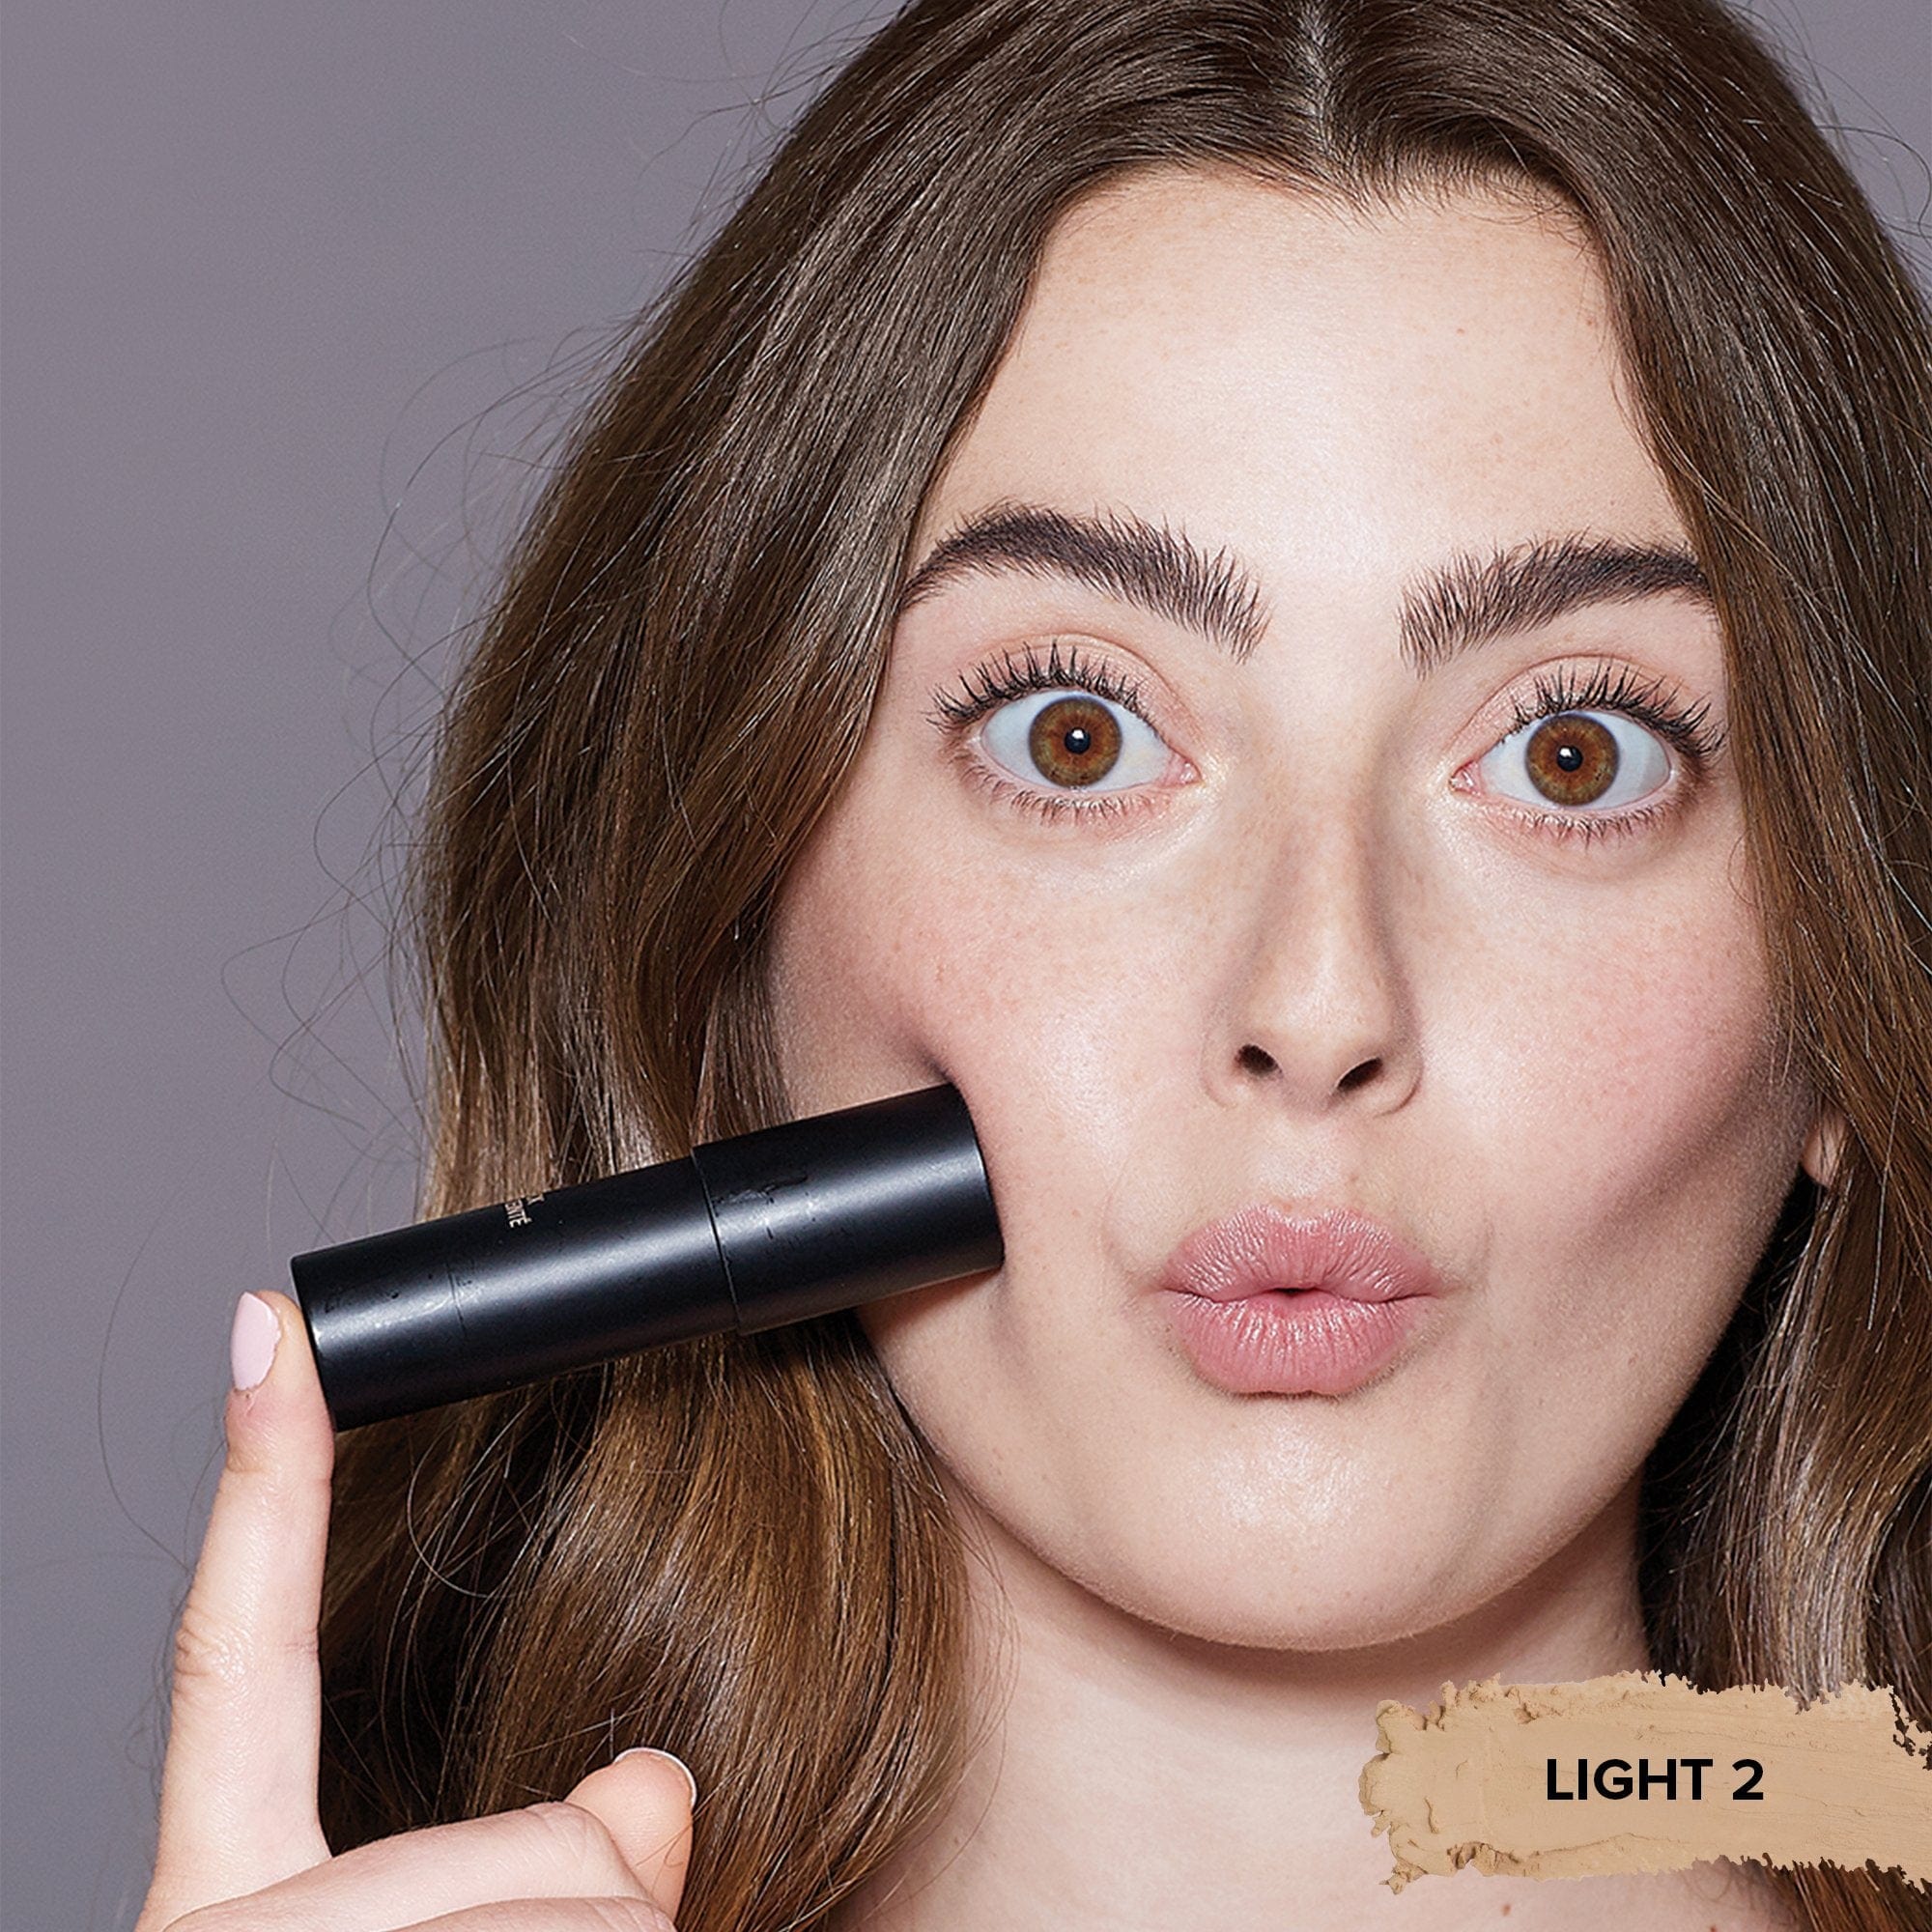 Taylor Frankel holding a Tinted Blur Foundation Stick in shade Light 2